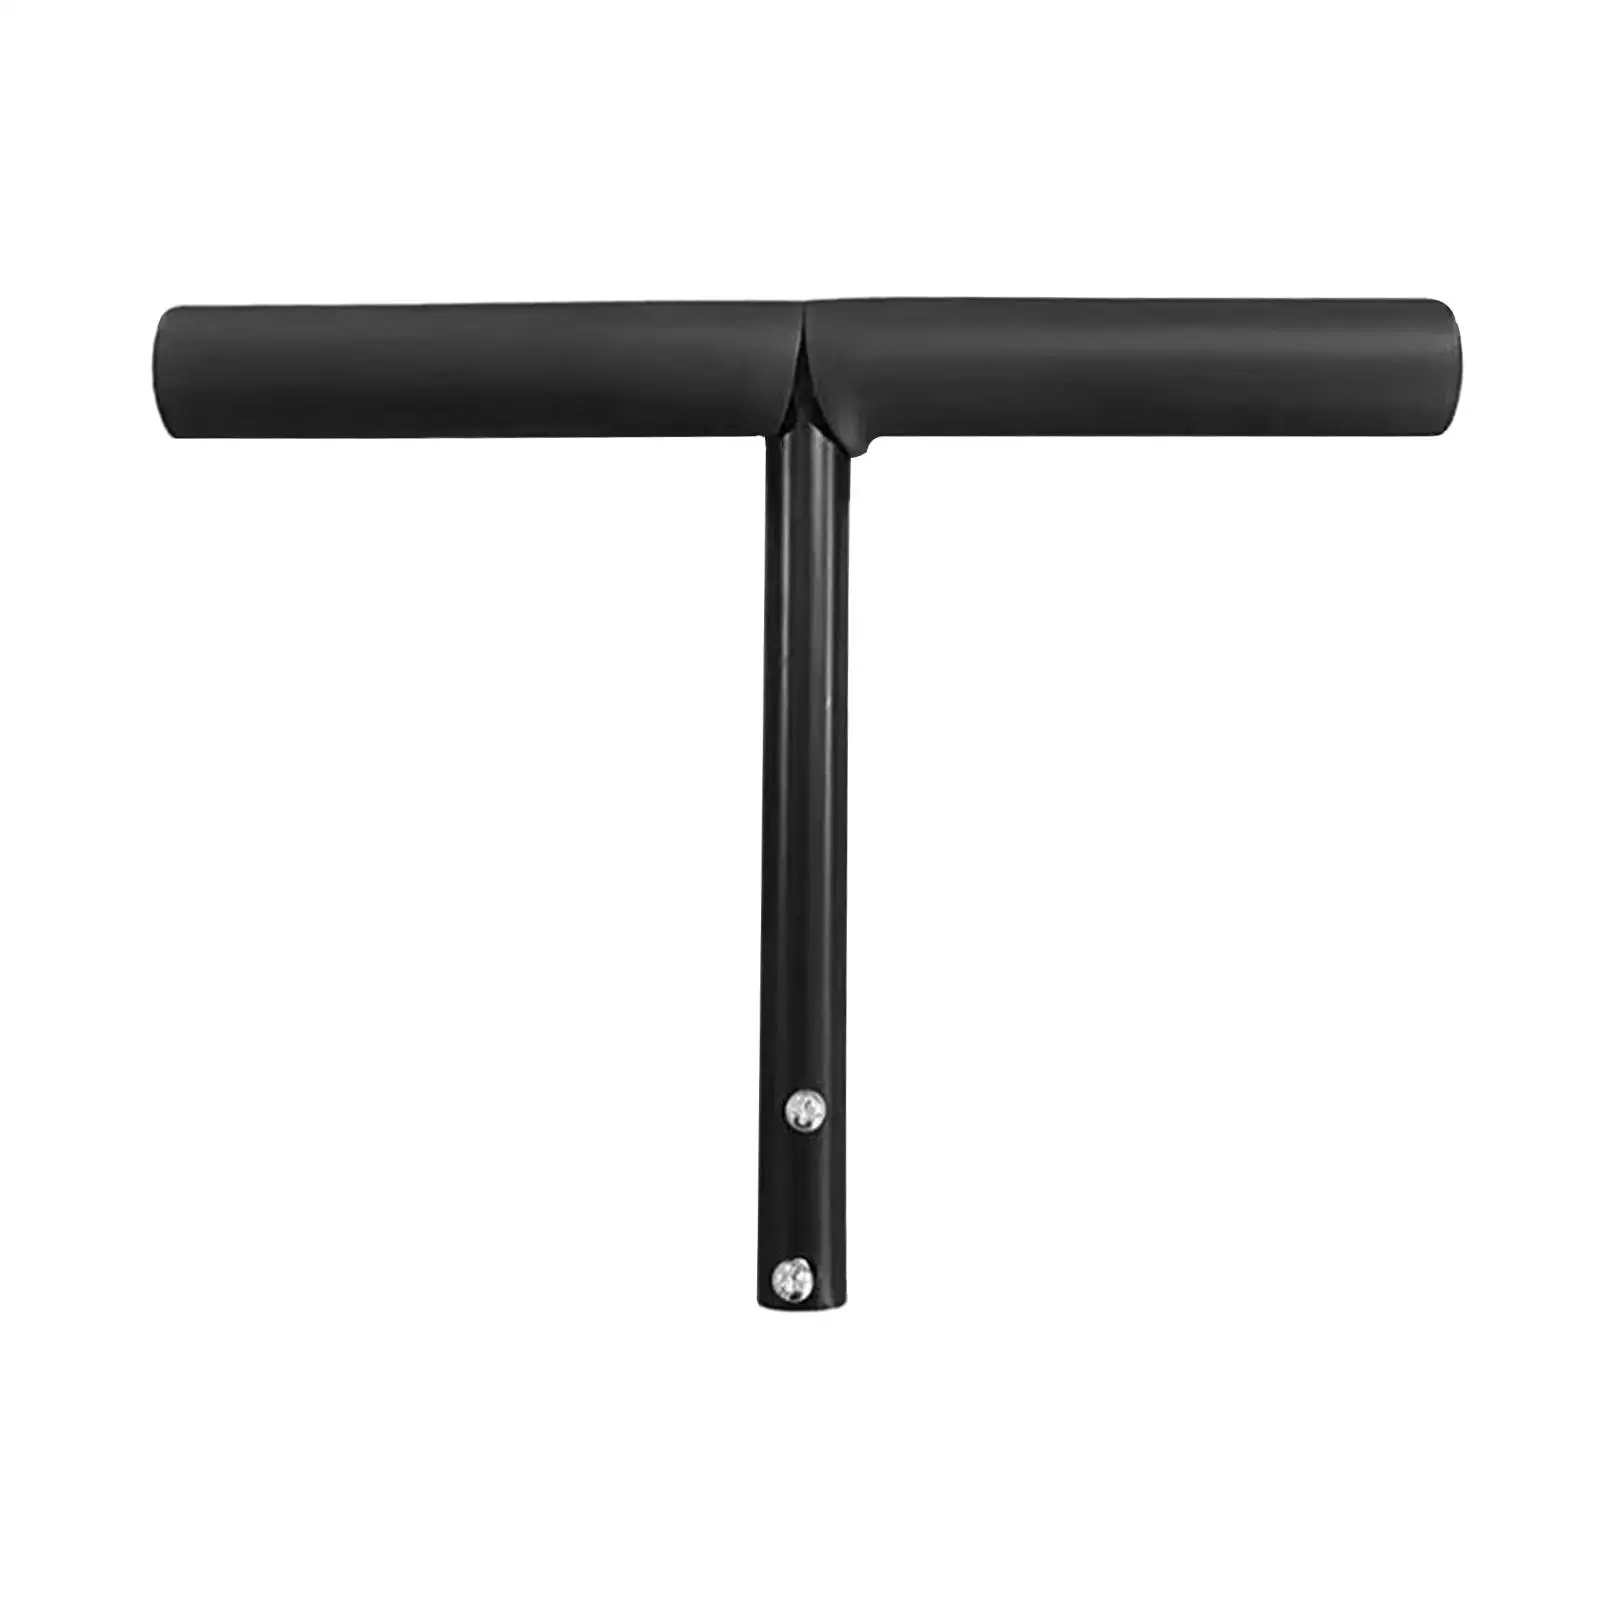 T Shaped Push Handle Bar Easy to Install Kids Tricycle Accessories Baby Bike Accessory for Travel Outdoor Home